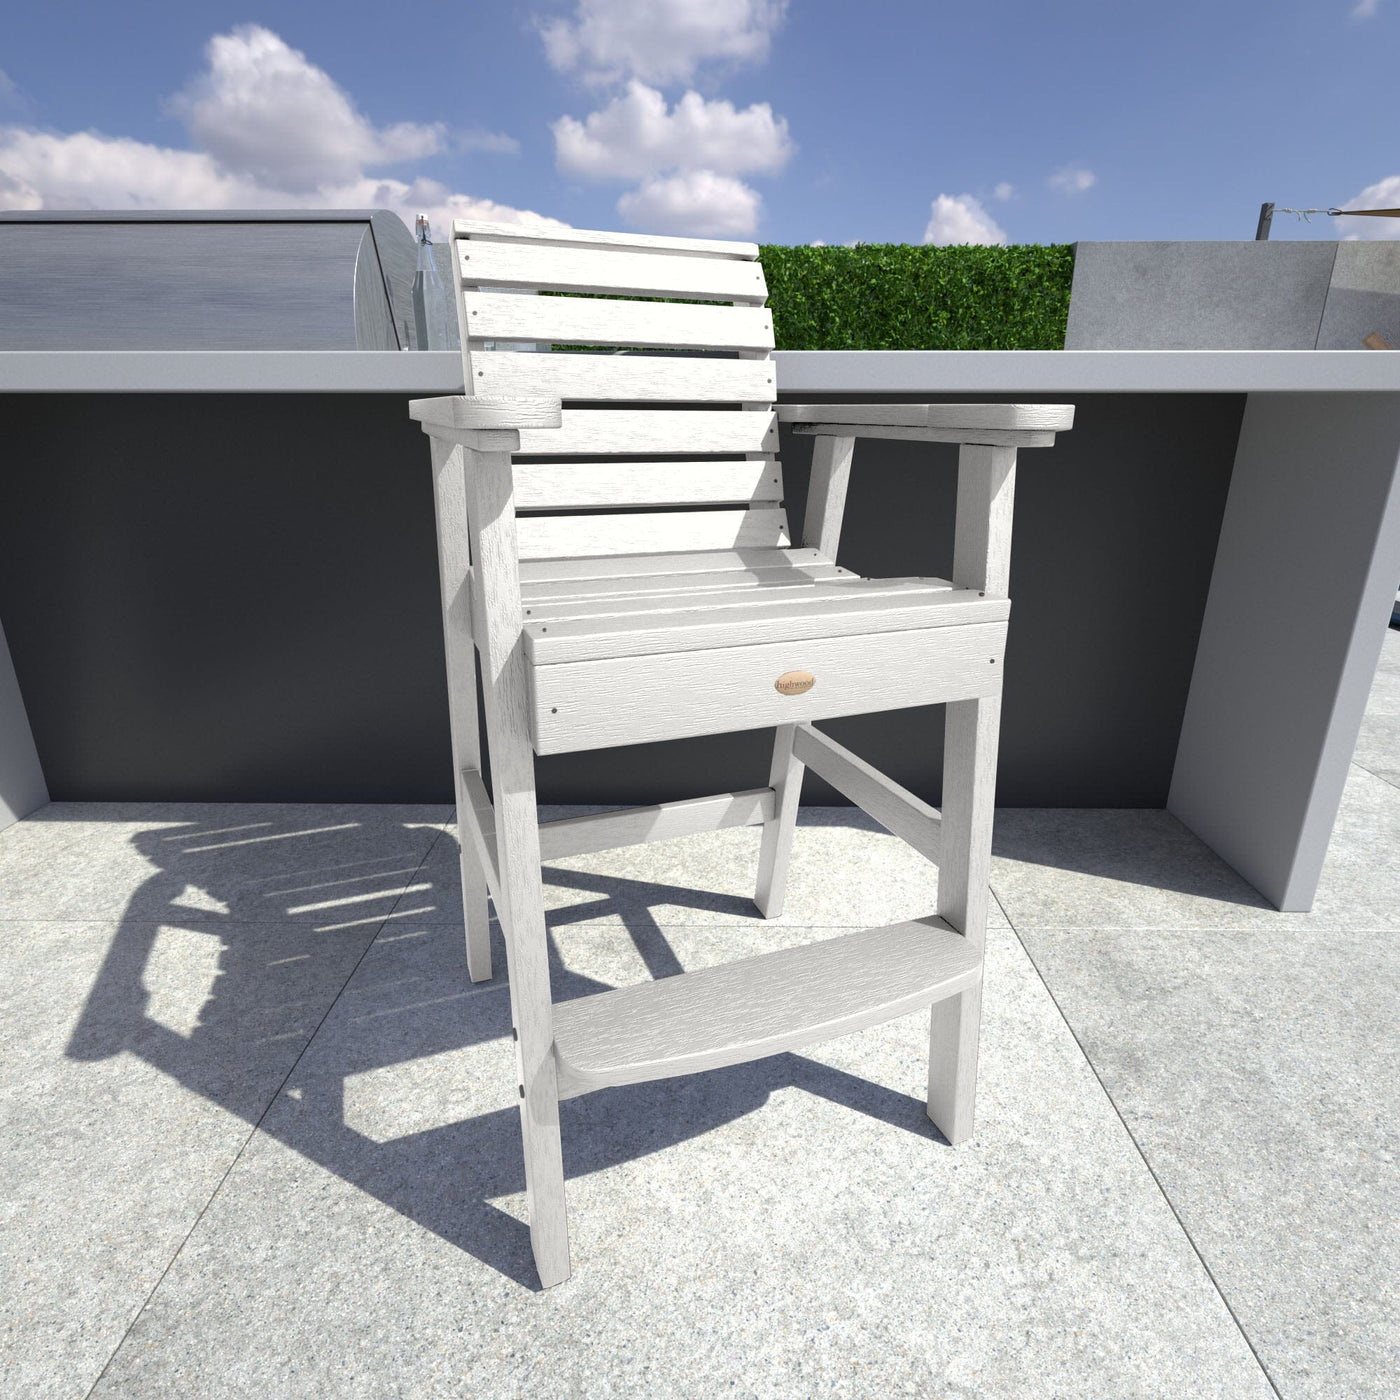 White Weatherly Bar Height Chair in outdoor kitchen